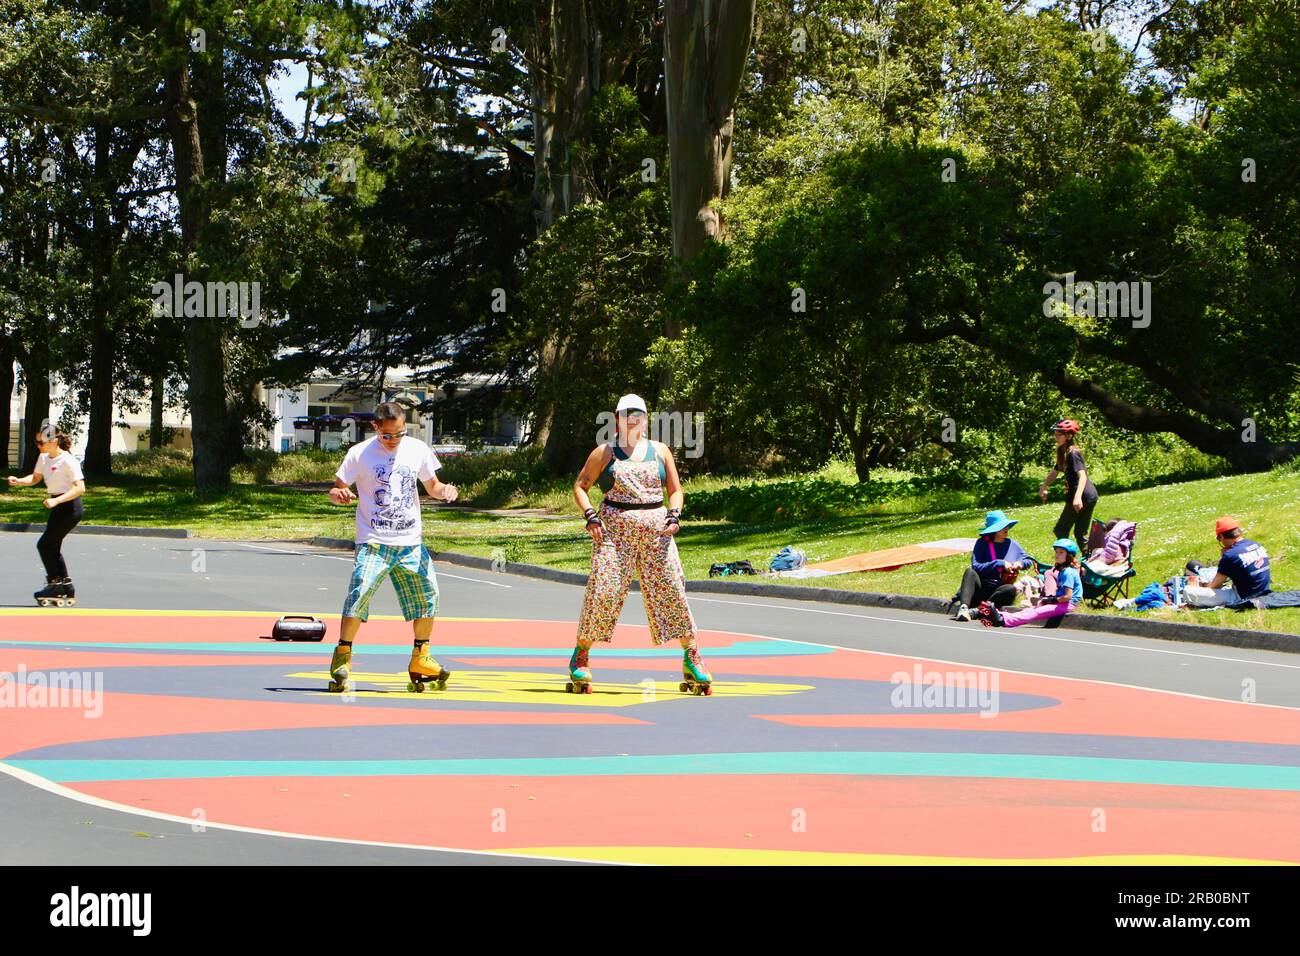 People practicing dance moves on roller skates San Francisco California USA Stock Photo